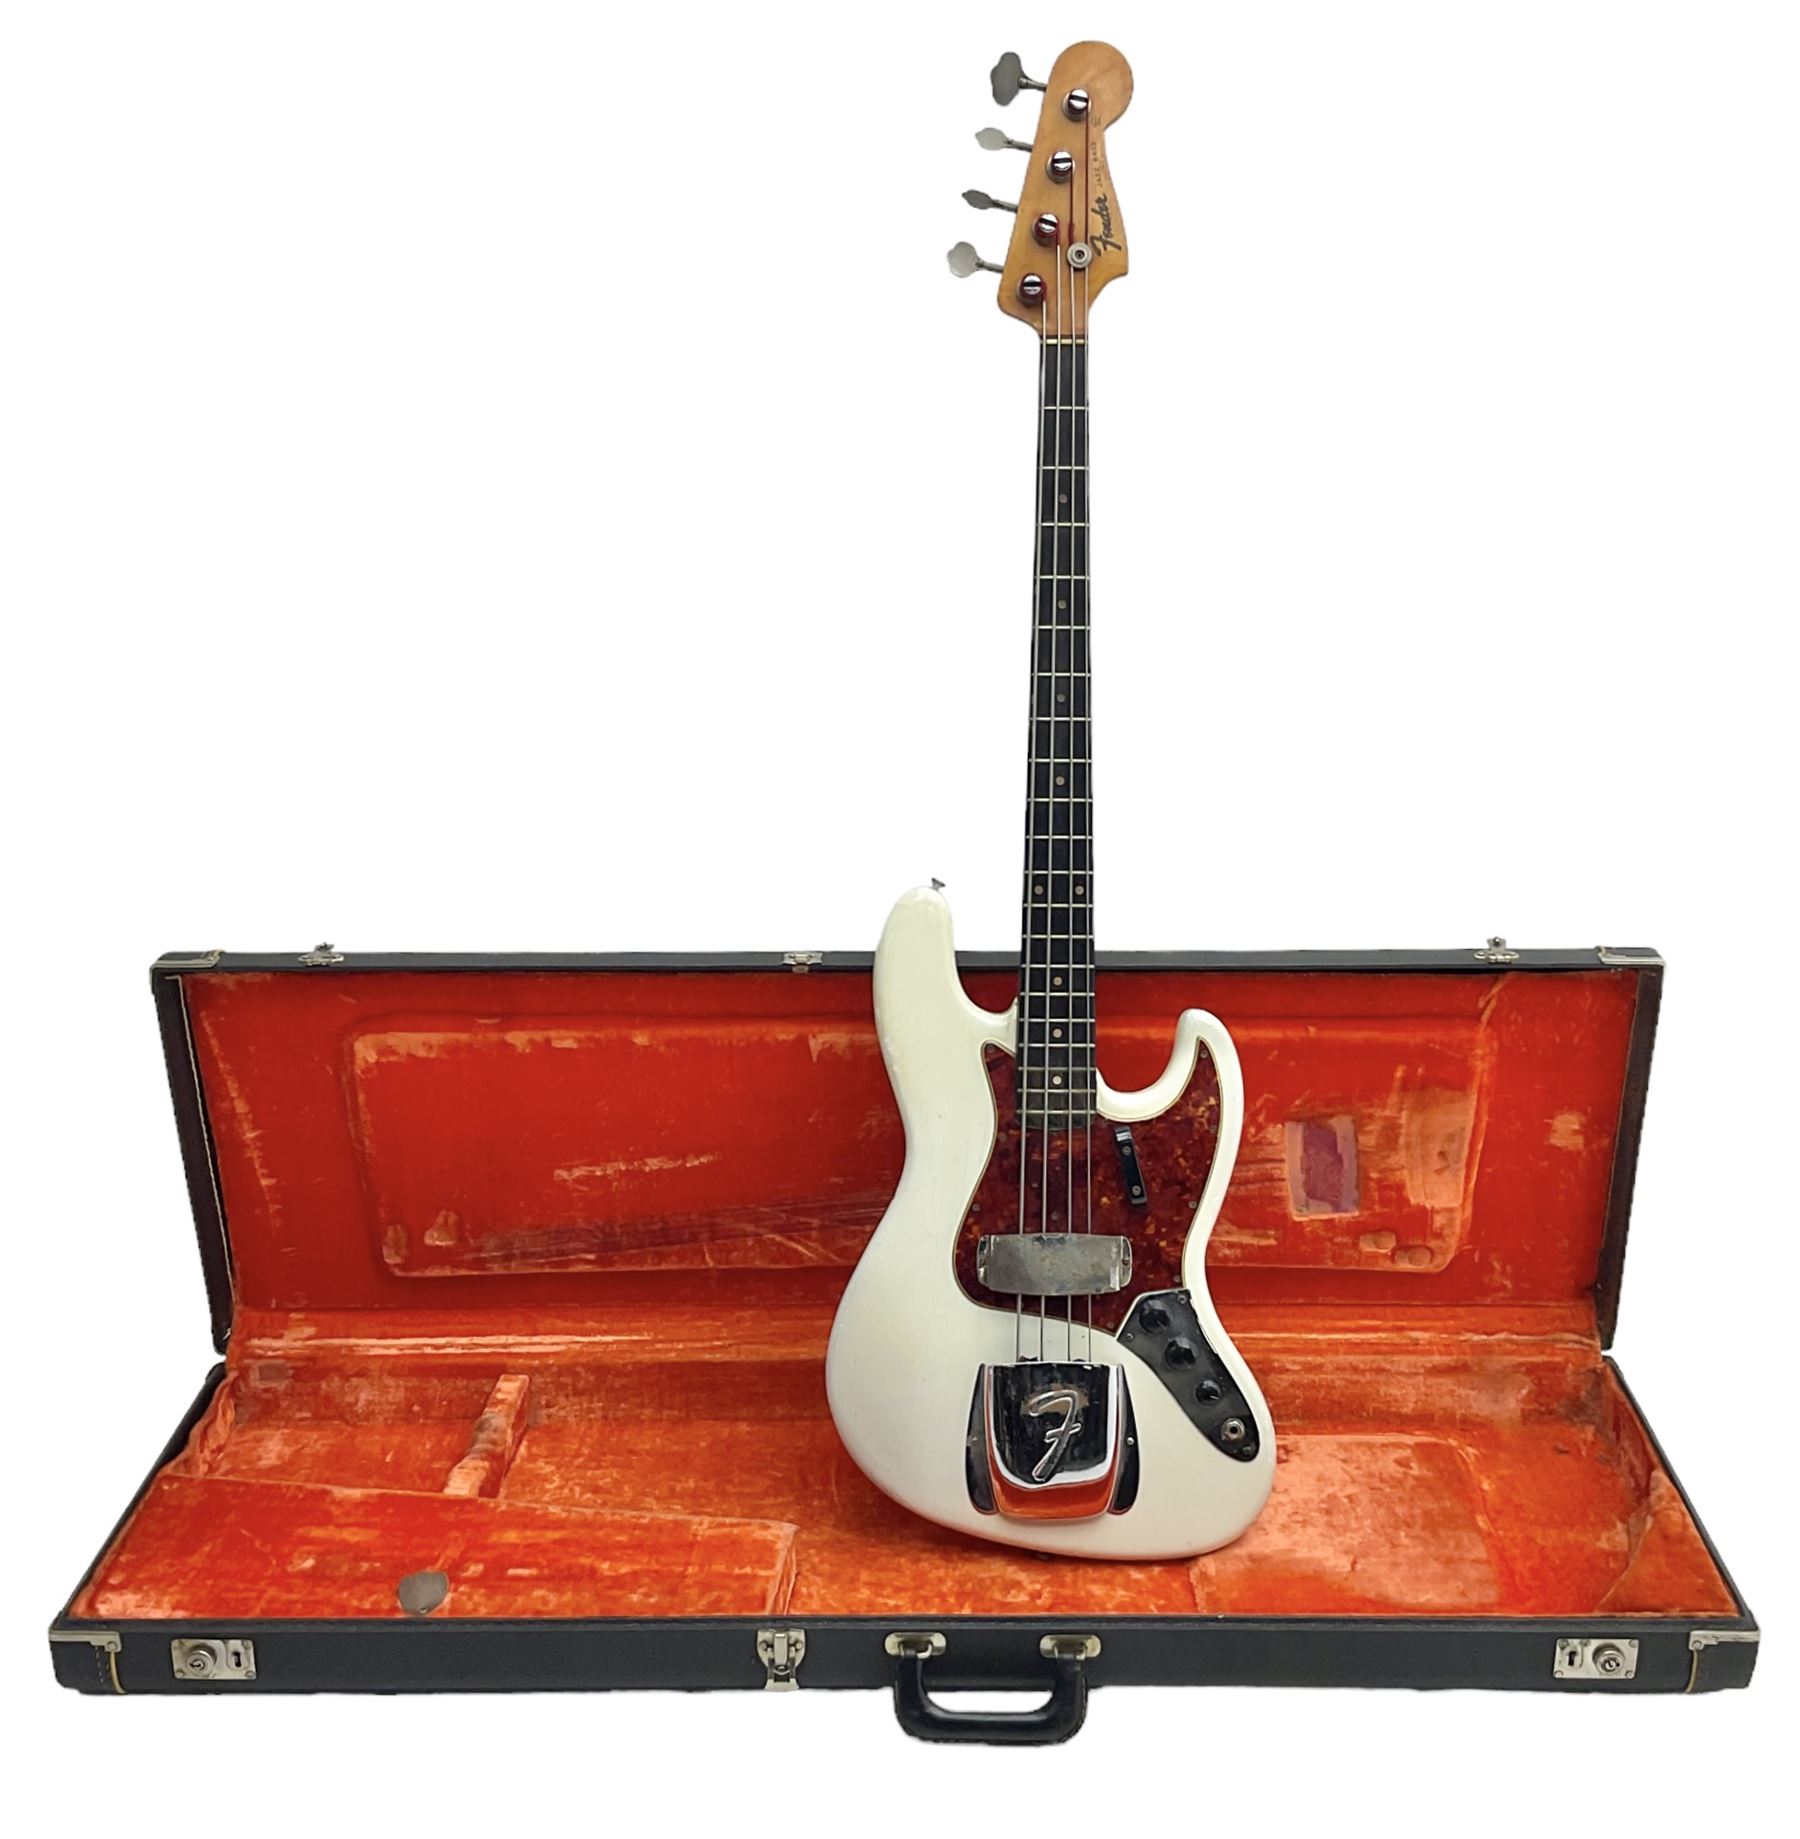 1963 Fender Jazz three-knob bass guitar; impressed with date code 7AUG63A on end of neck and serial